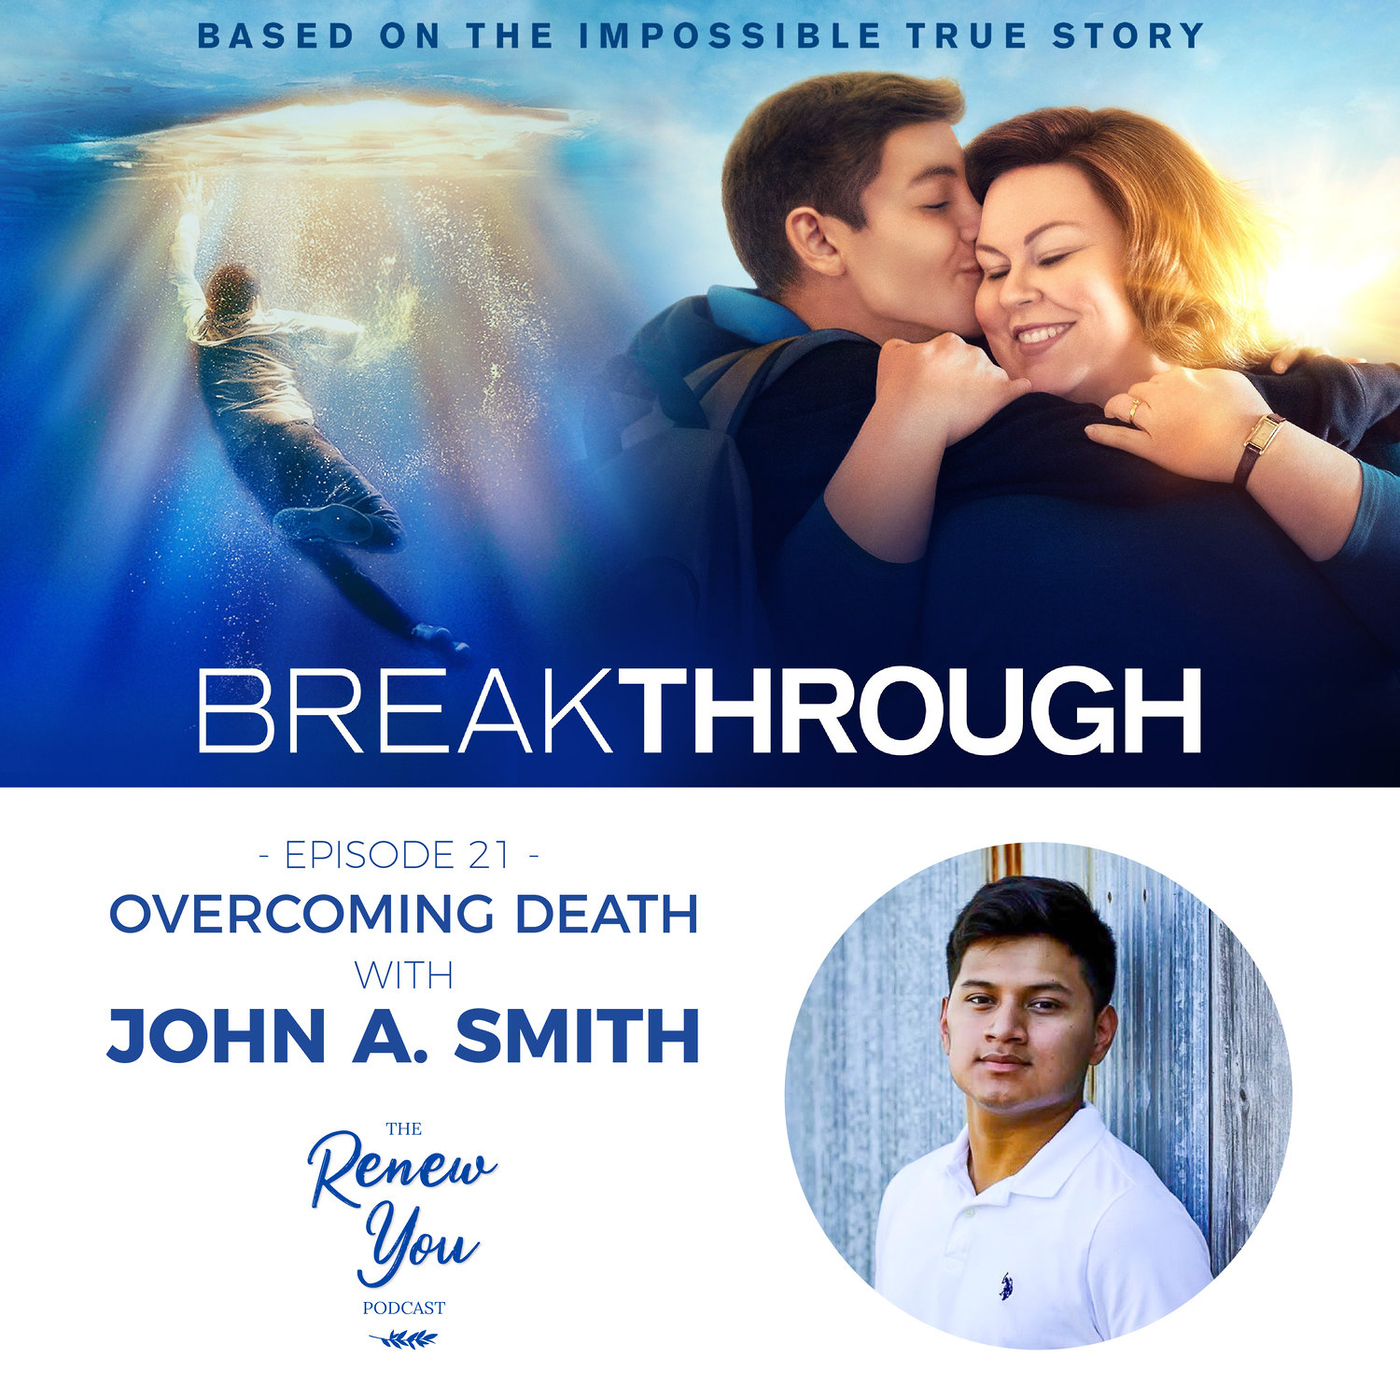 Episode 21: Overcoming Death: The Real Breakthrough Story with John A. Smith